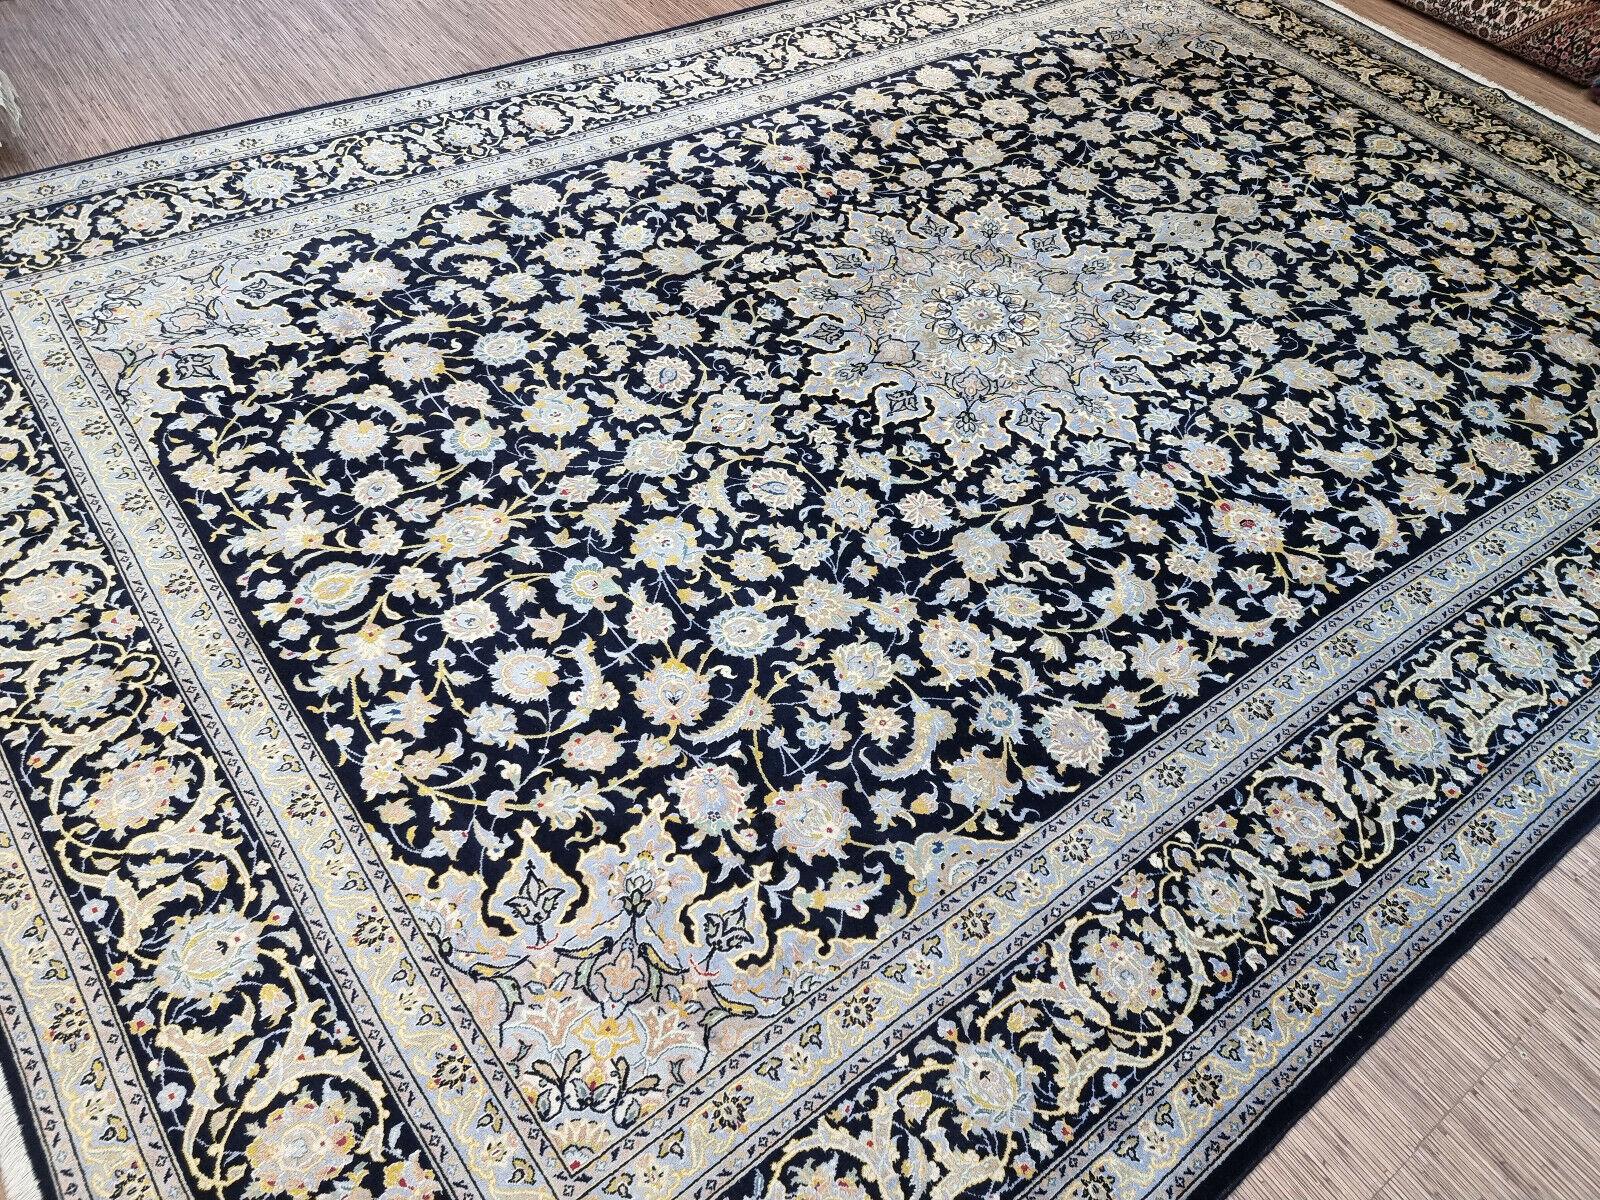 Handmade Vintage Persian Style Kashan Oversize Rug 10.1' x 14.4', 1970s - 1D69 In Good Condition For Sale In Bordeaux, FR